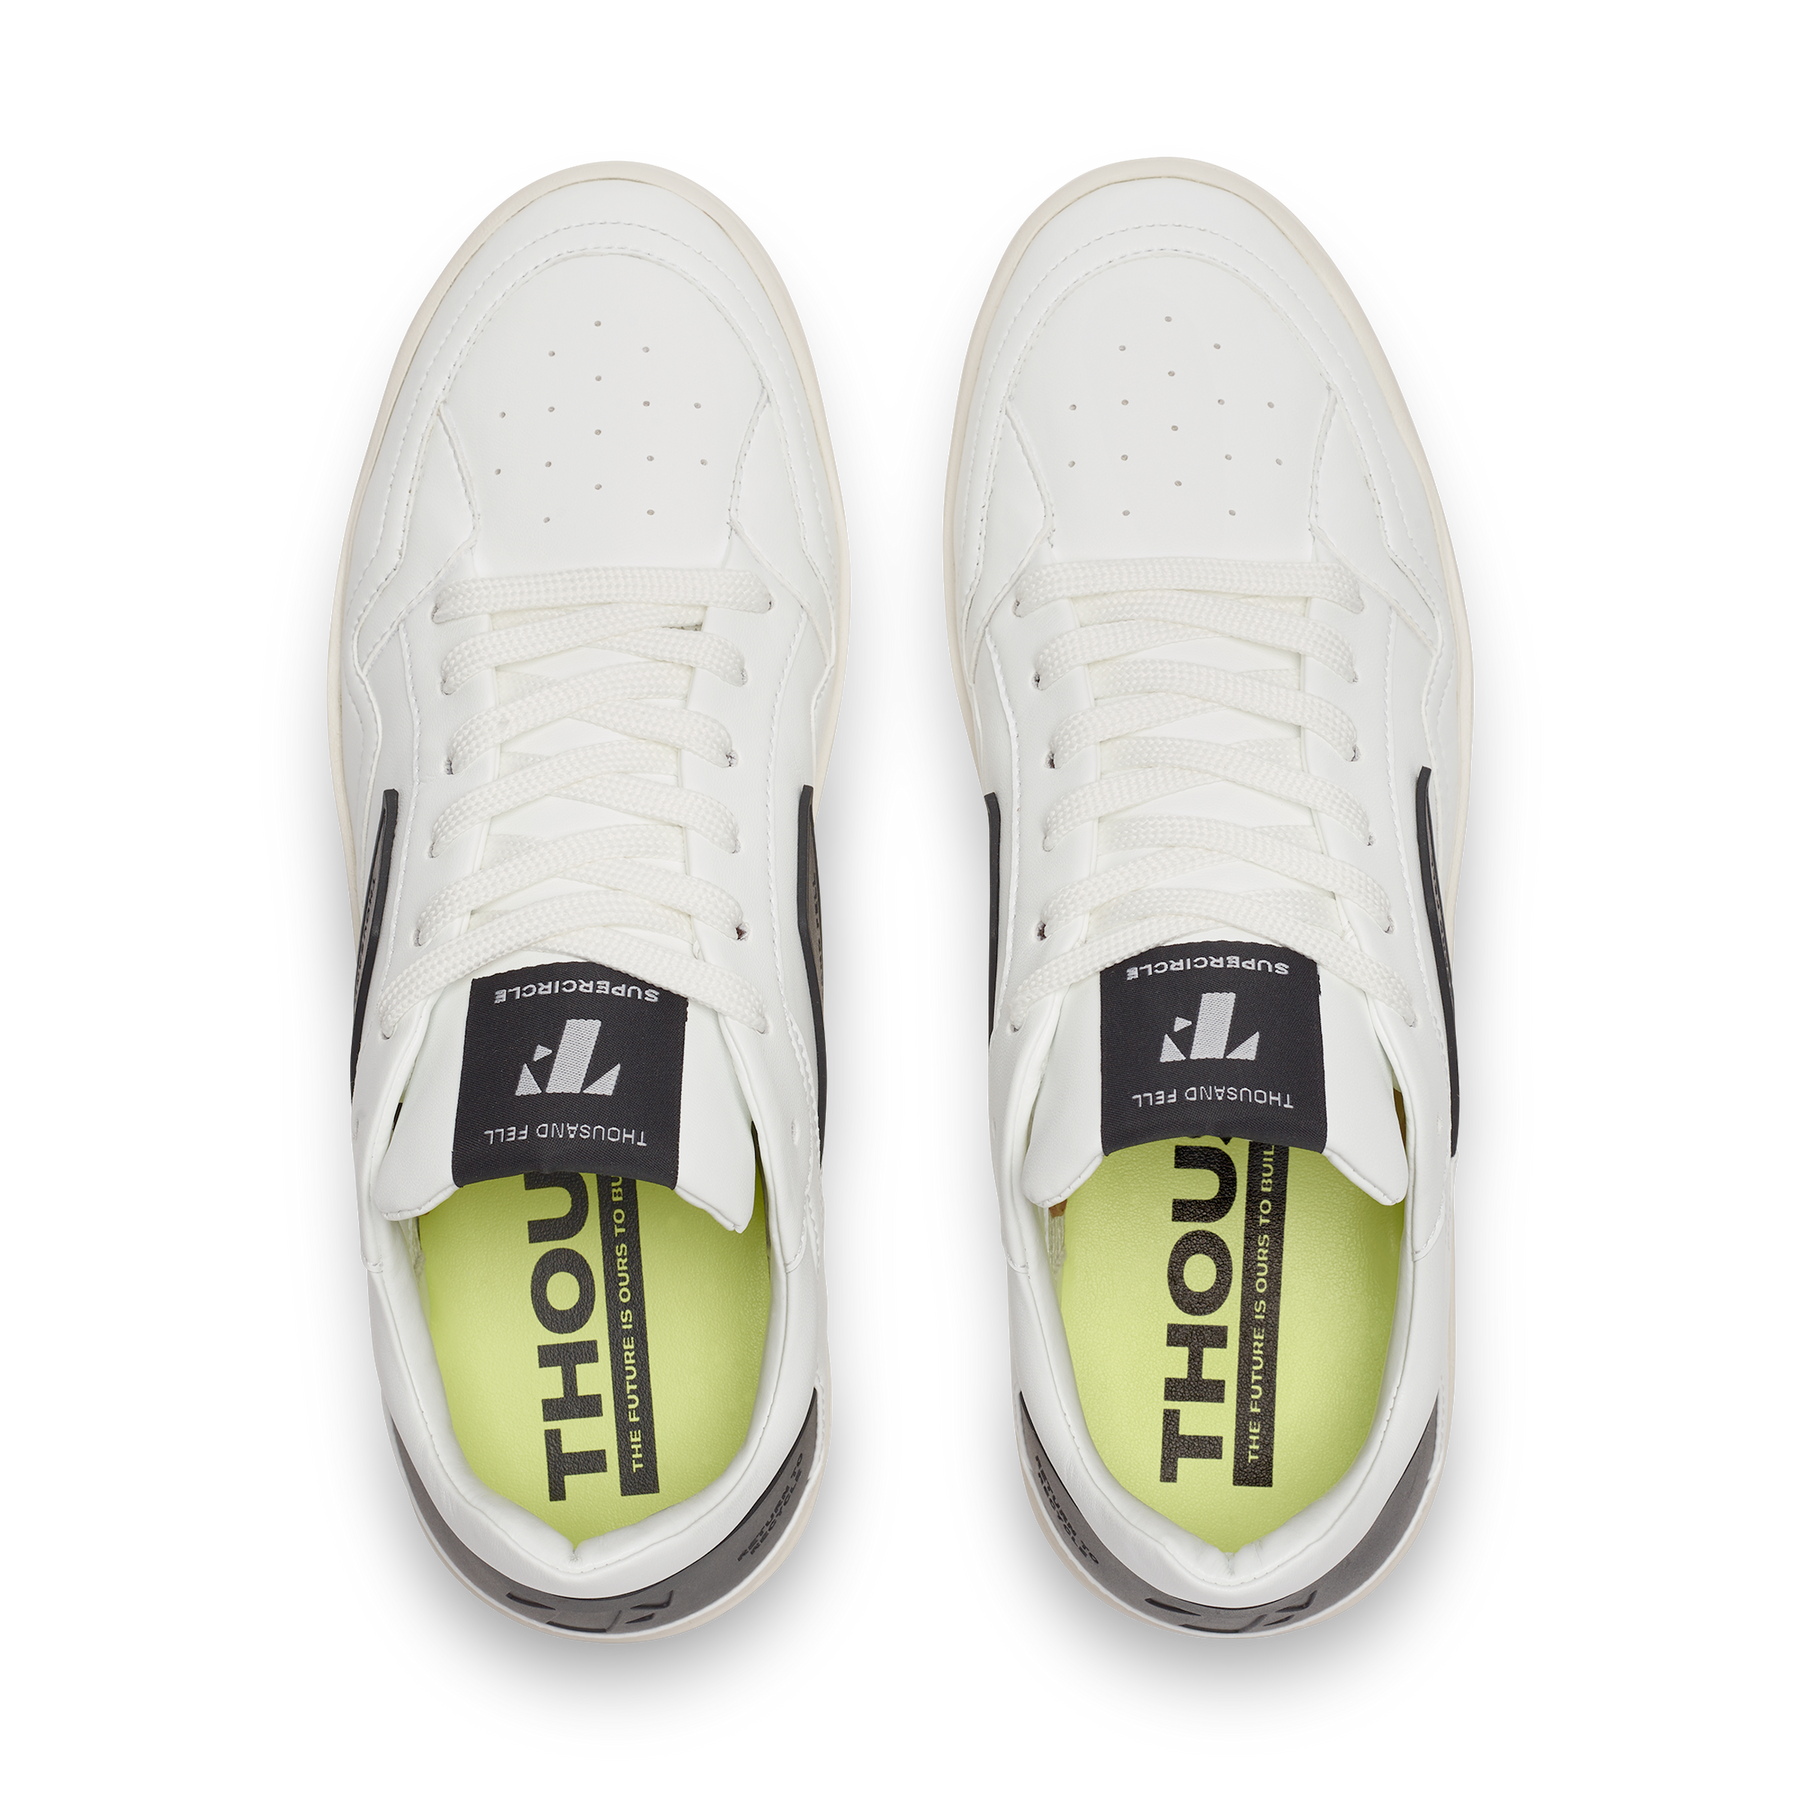 top view of white ethical alternative to nike court sneakers with black details